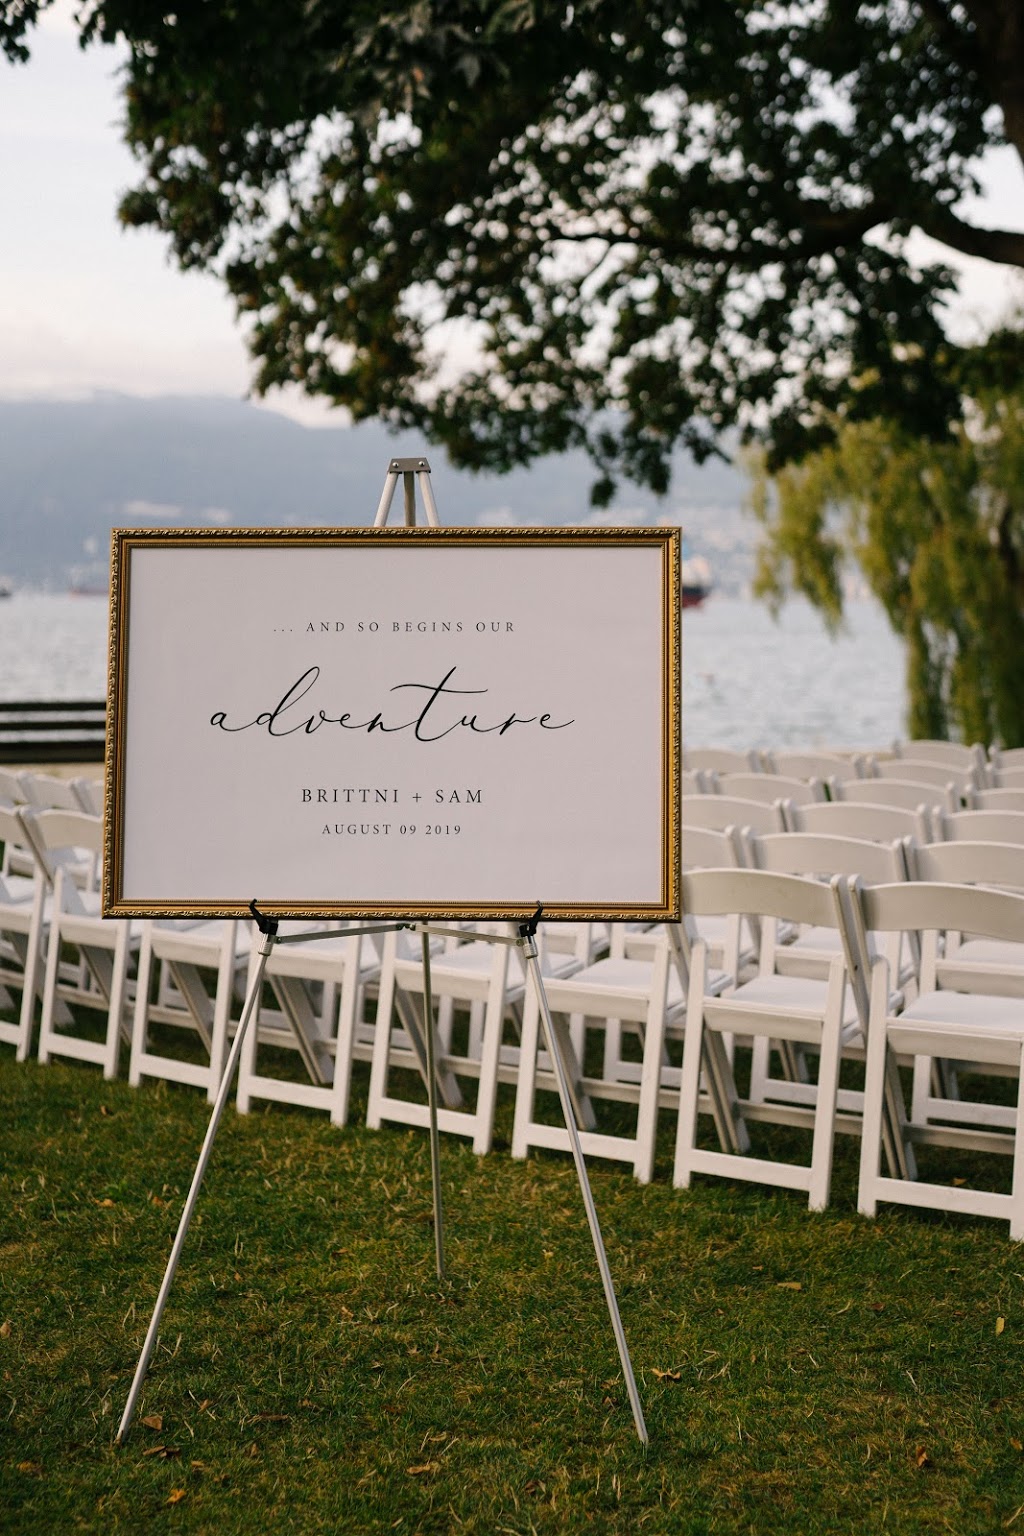 Elyse and Co Events | King St, Fort Langley, BC V1M 2R8, Canada | Phone: (778) 879-8678